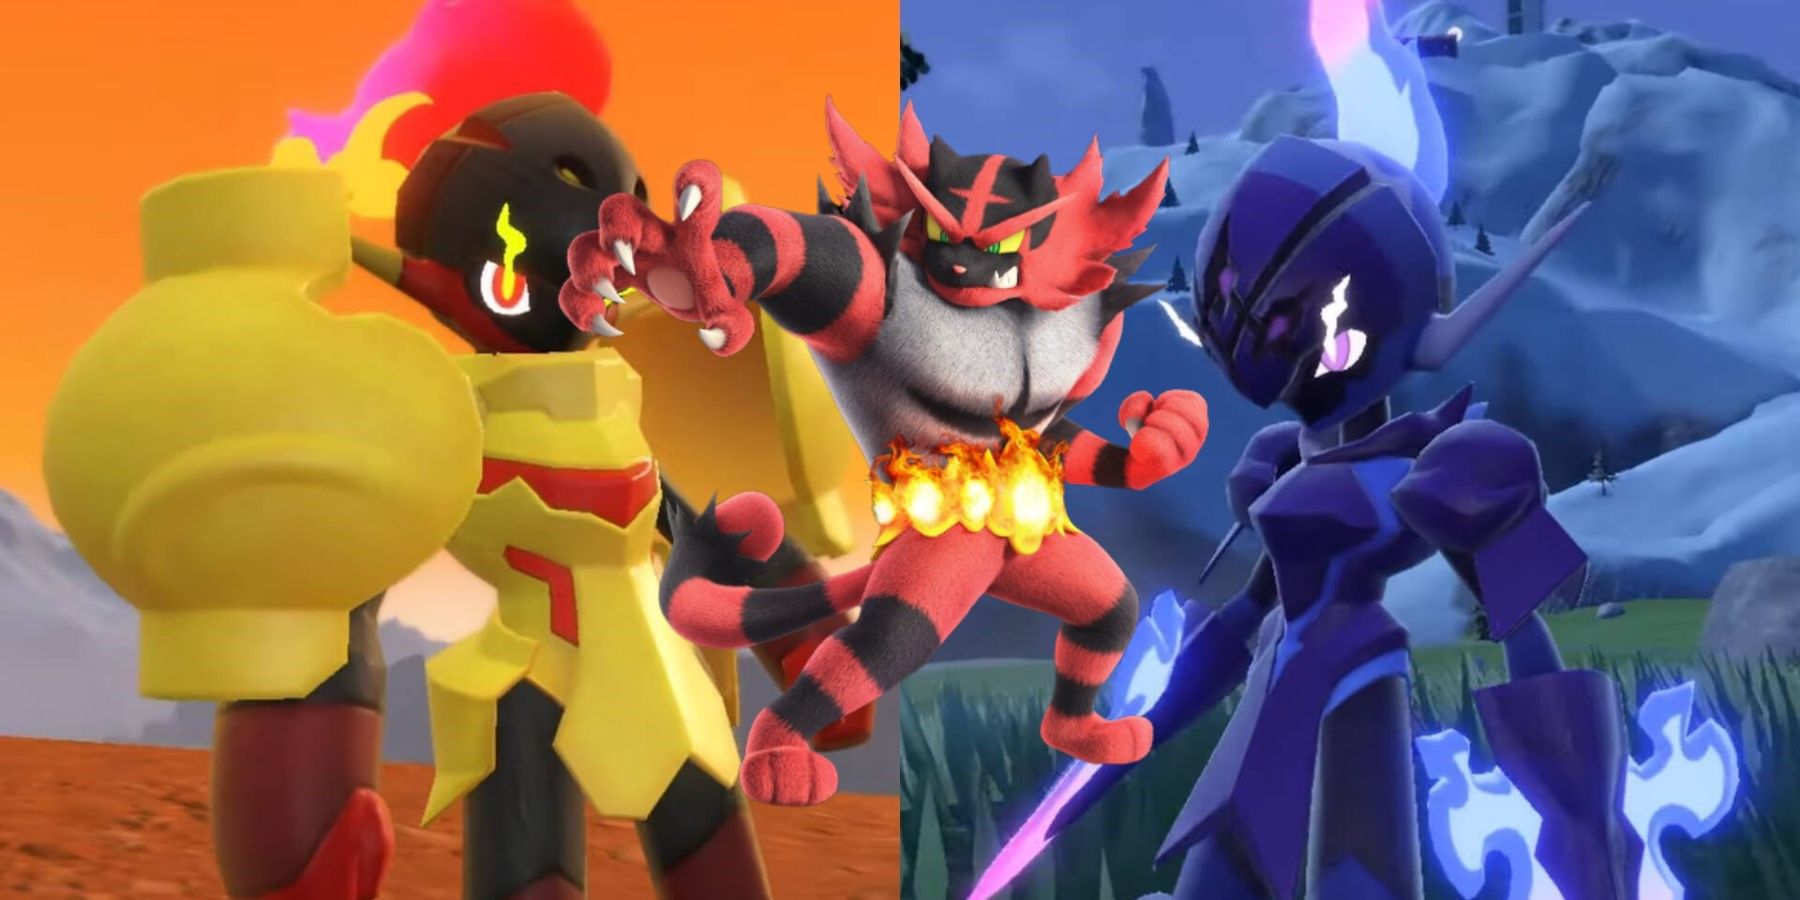 Pokemon Scarlet and Violet Leaker Compares New Ghost Pokemon to